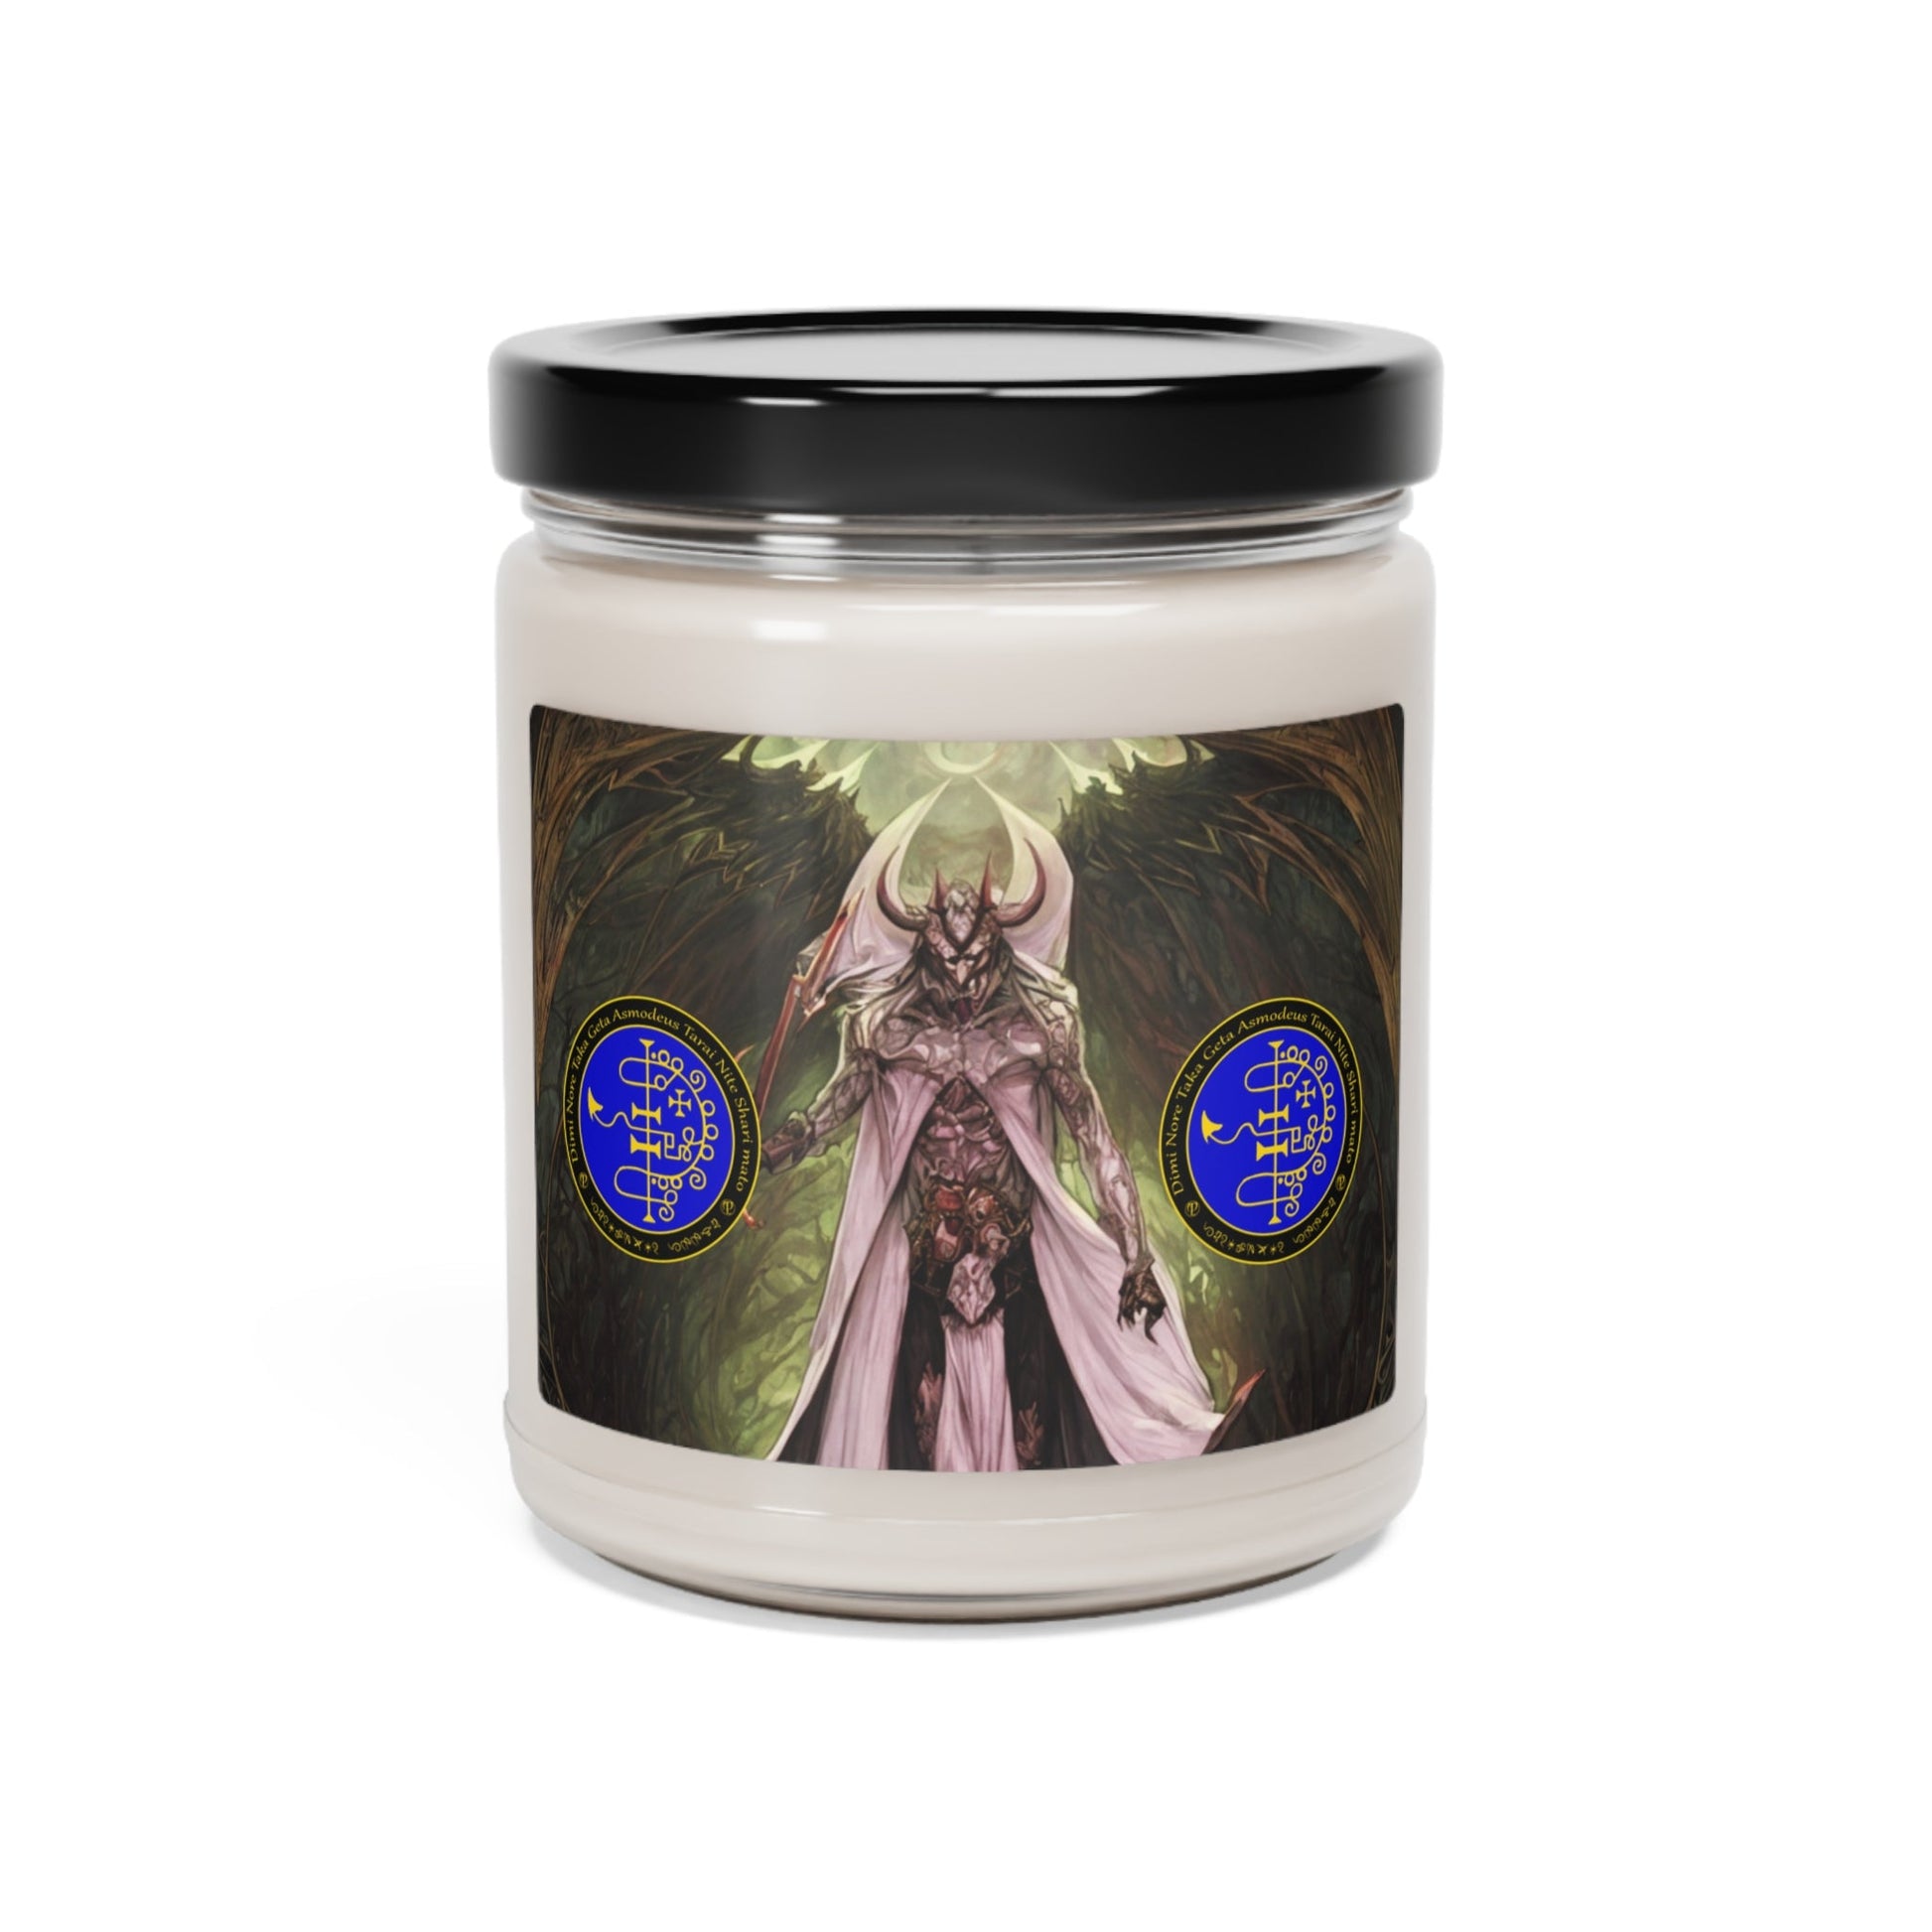 Demon-Asmodeus-Altar-Scented-Soy-Candle-for-Gambling-related-offerings-rituals-initiations-or-praying-and-meditation